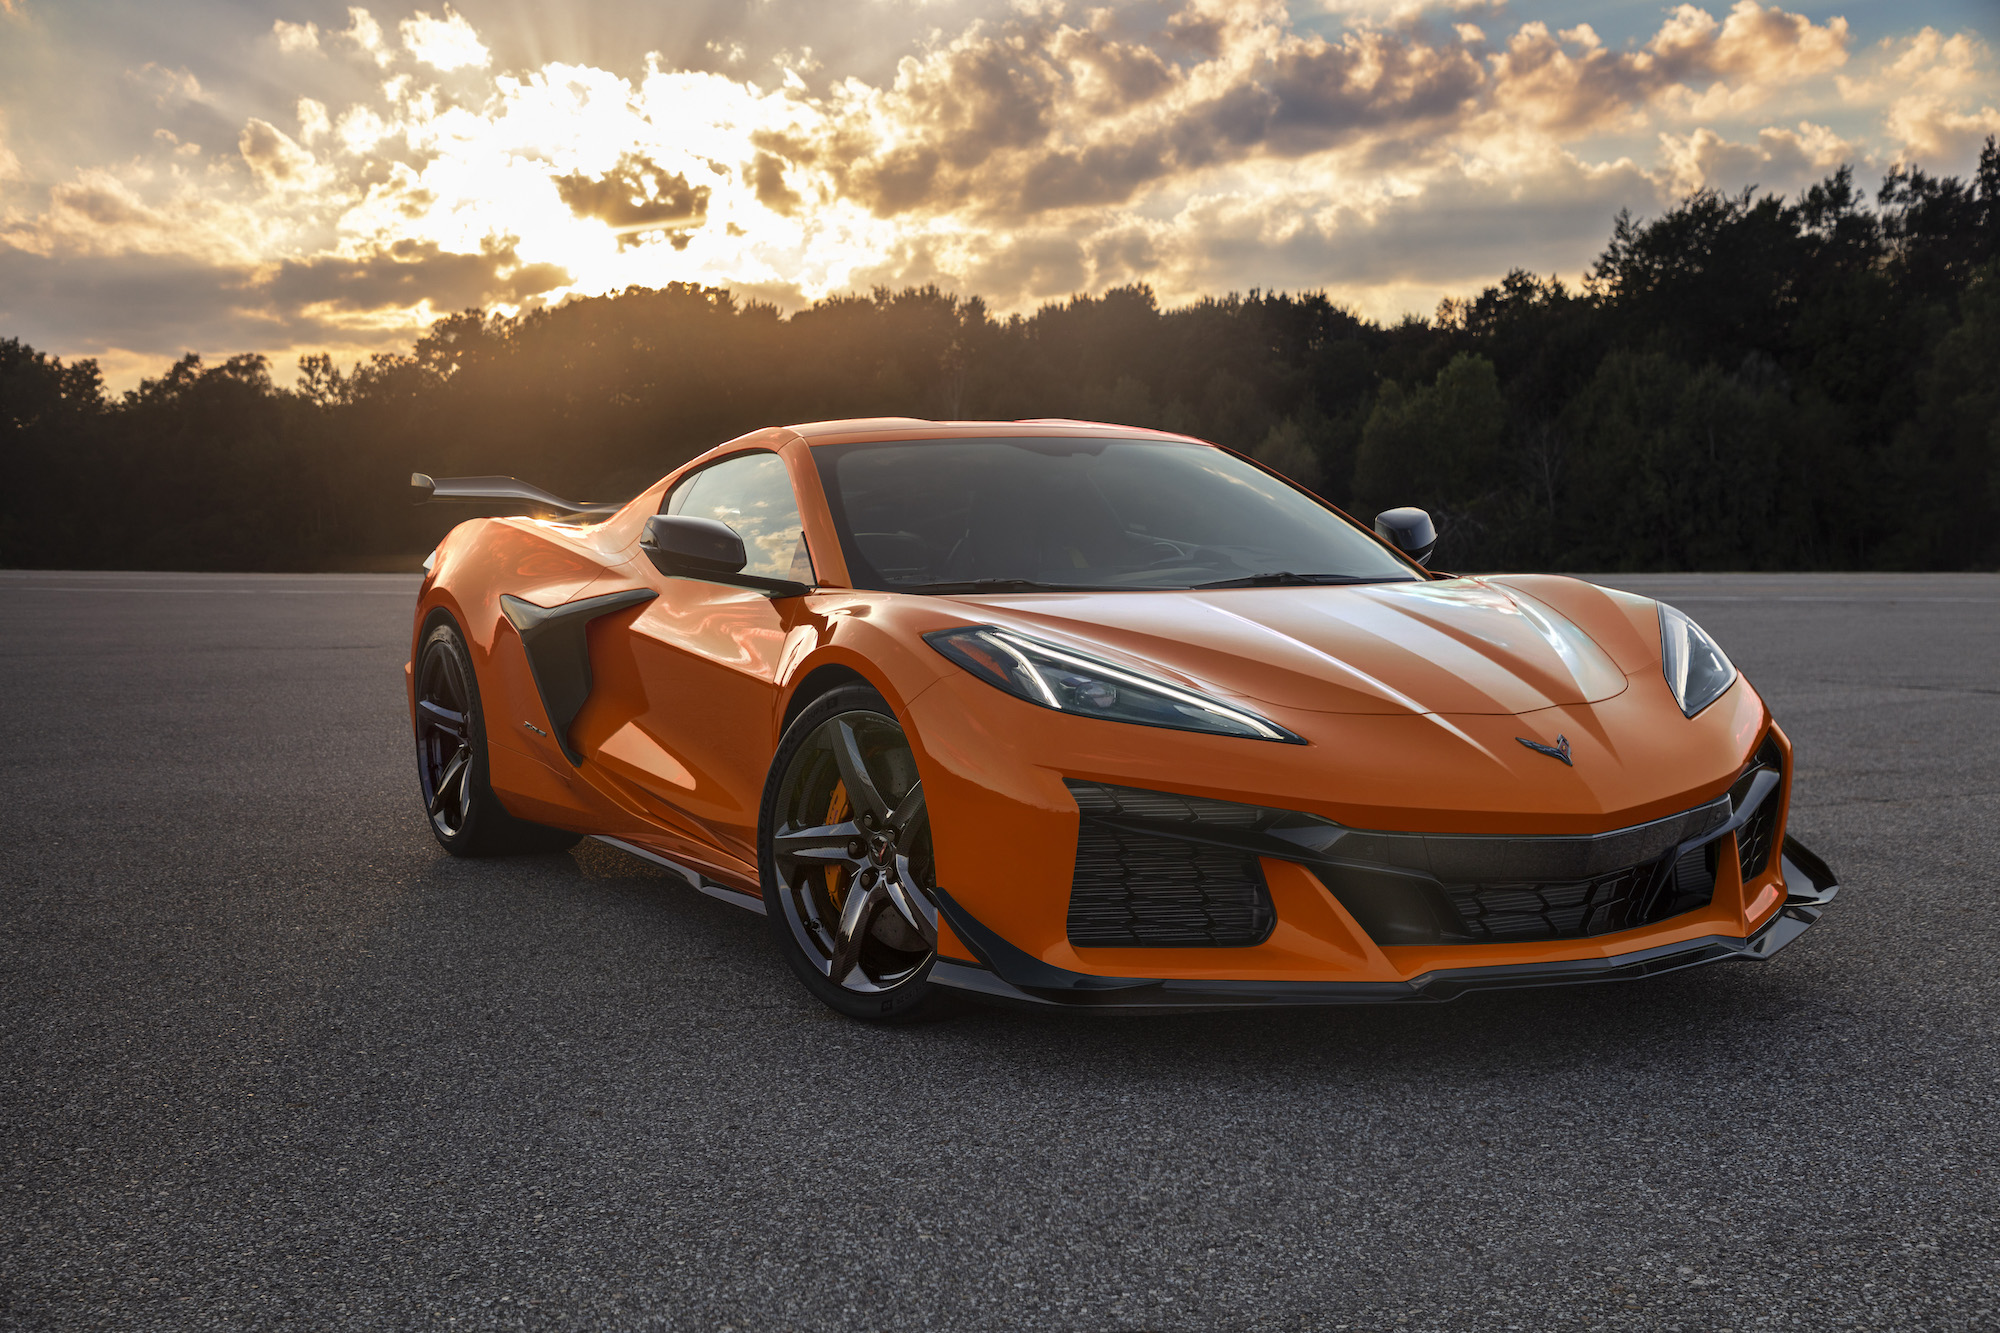 The new Corvette Z06 is a ruthless machine with a sound to match